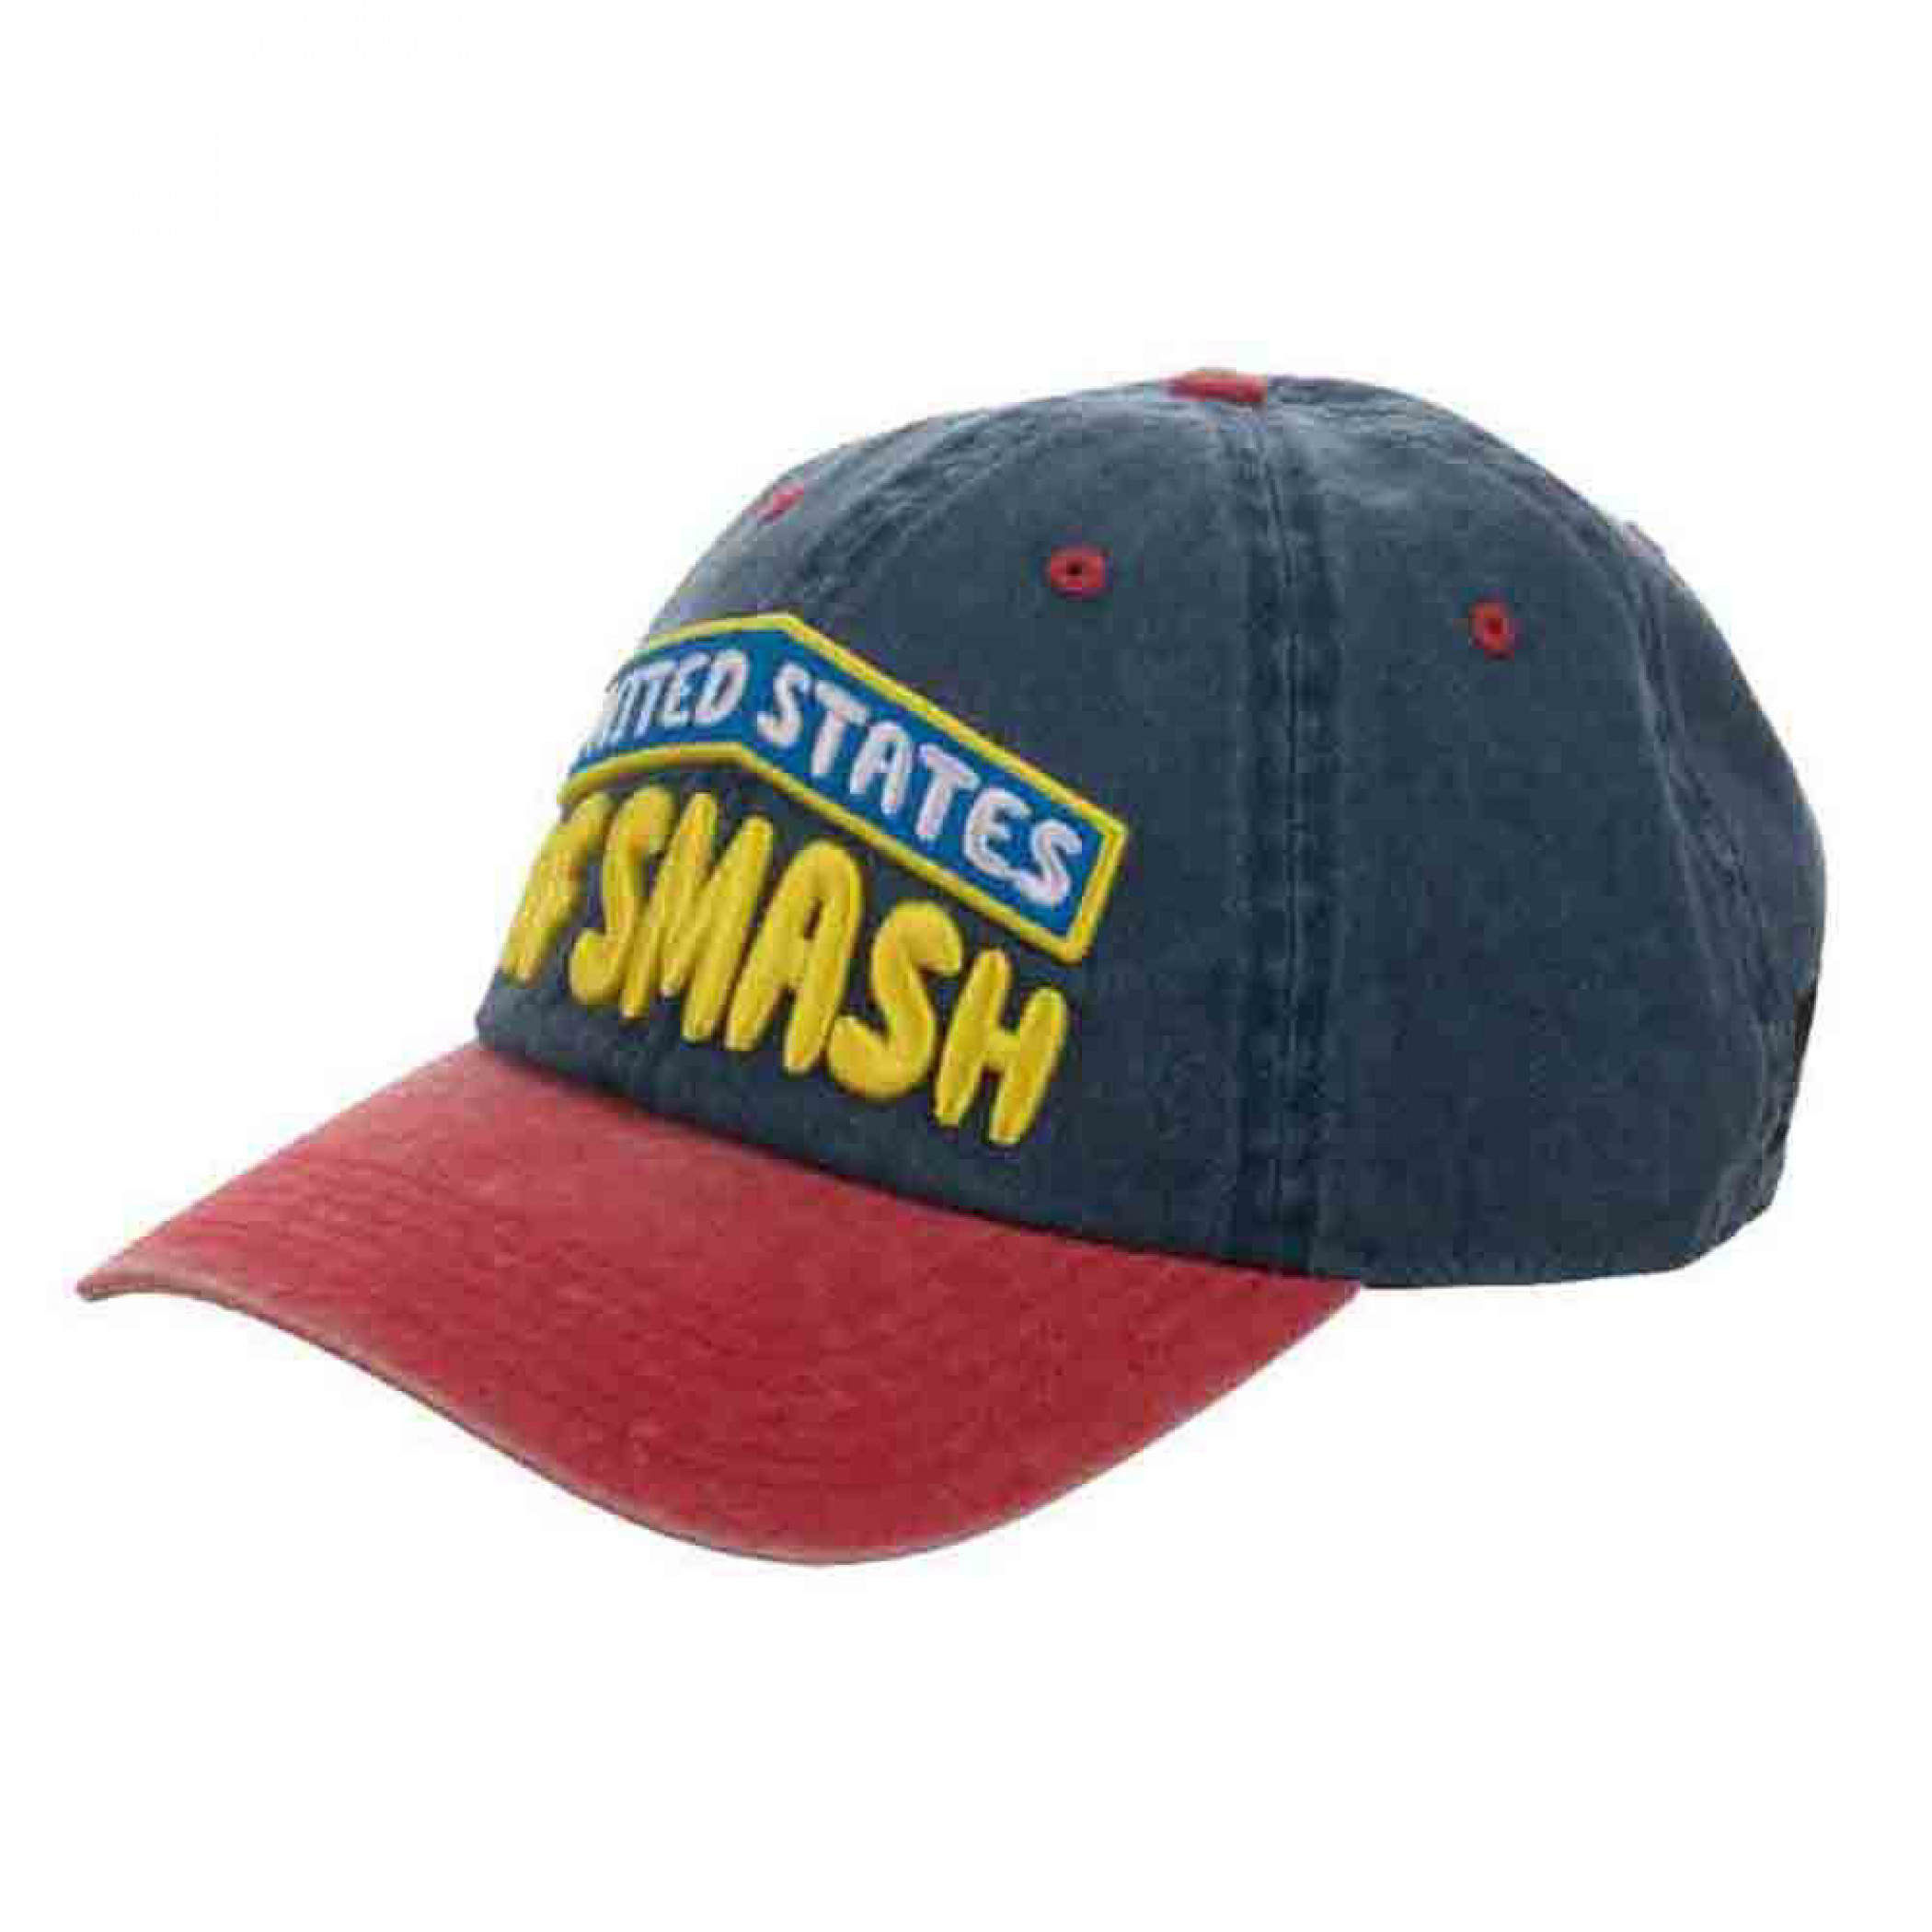 My Hero Academia All Might United States of Smash Embroidered Hat